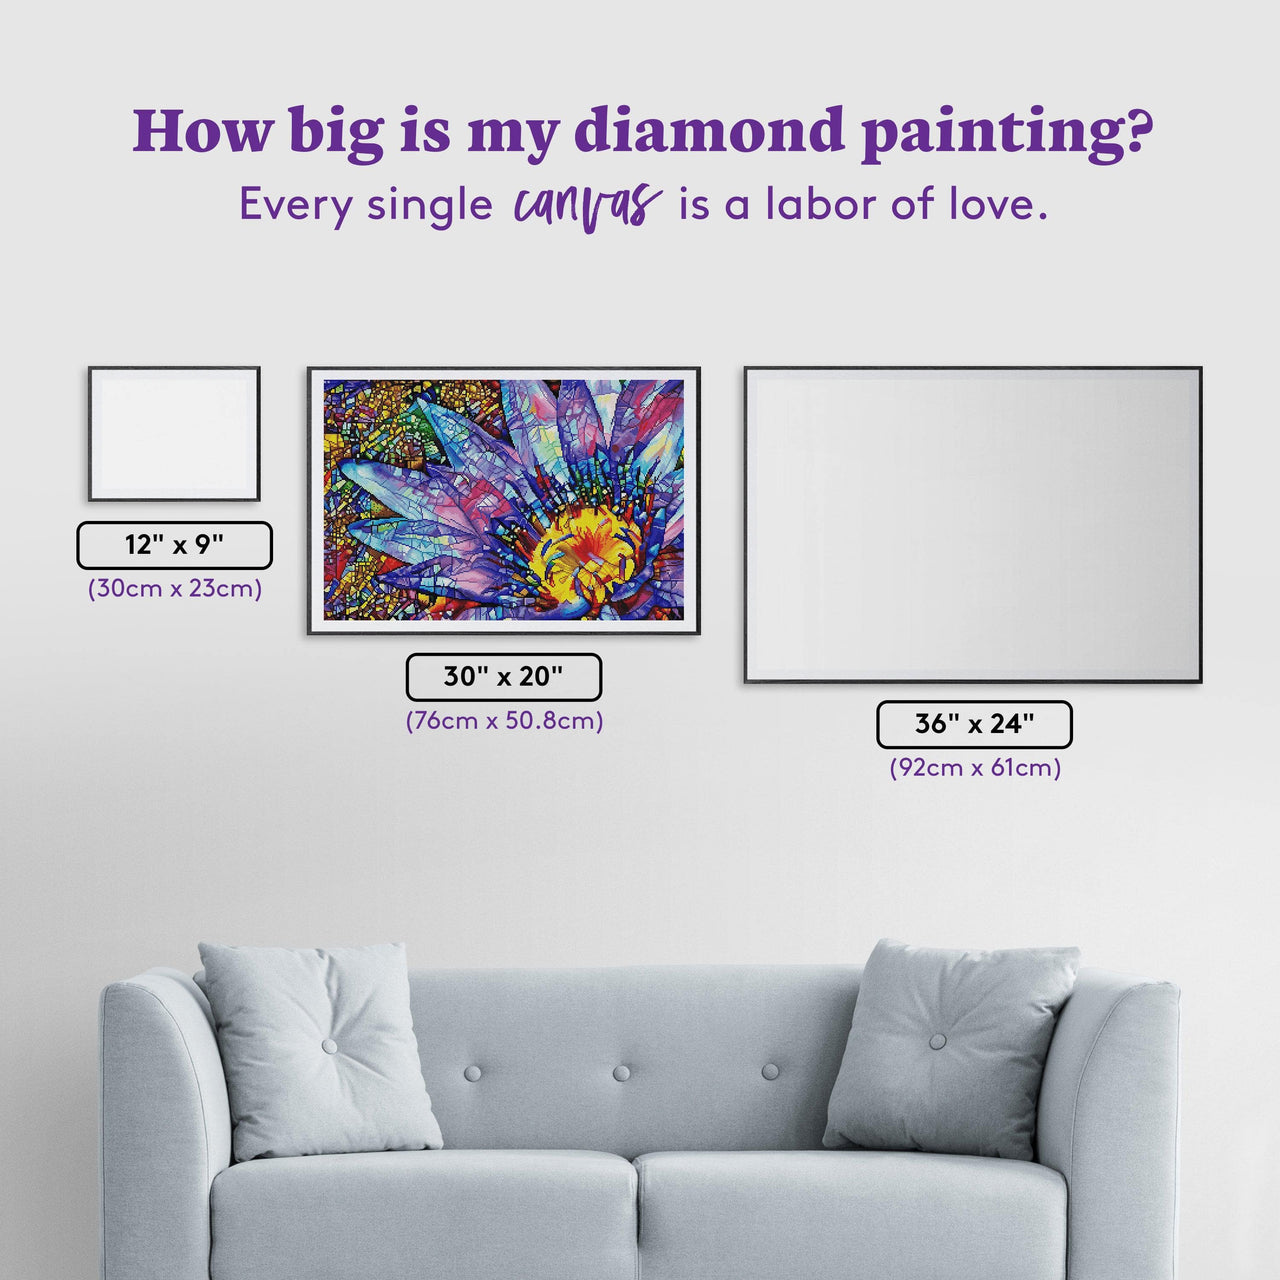 Diamond Painting Clematis Stained Glass 30" x 20" (76cm x 50.8cm) / Square with 67 Colors including 6 ABs / 62,220